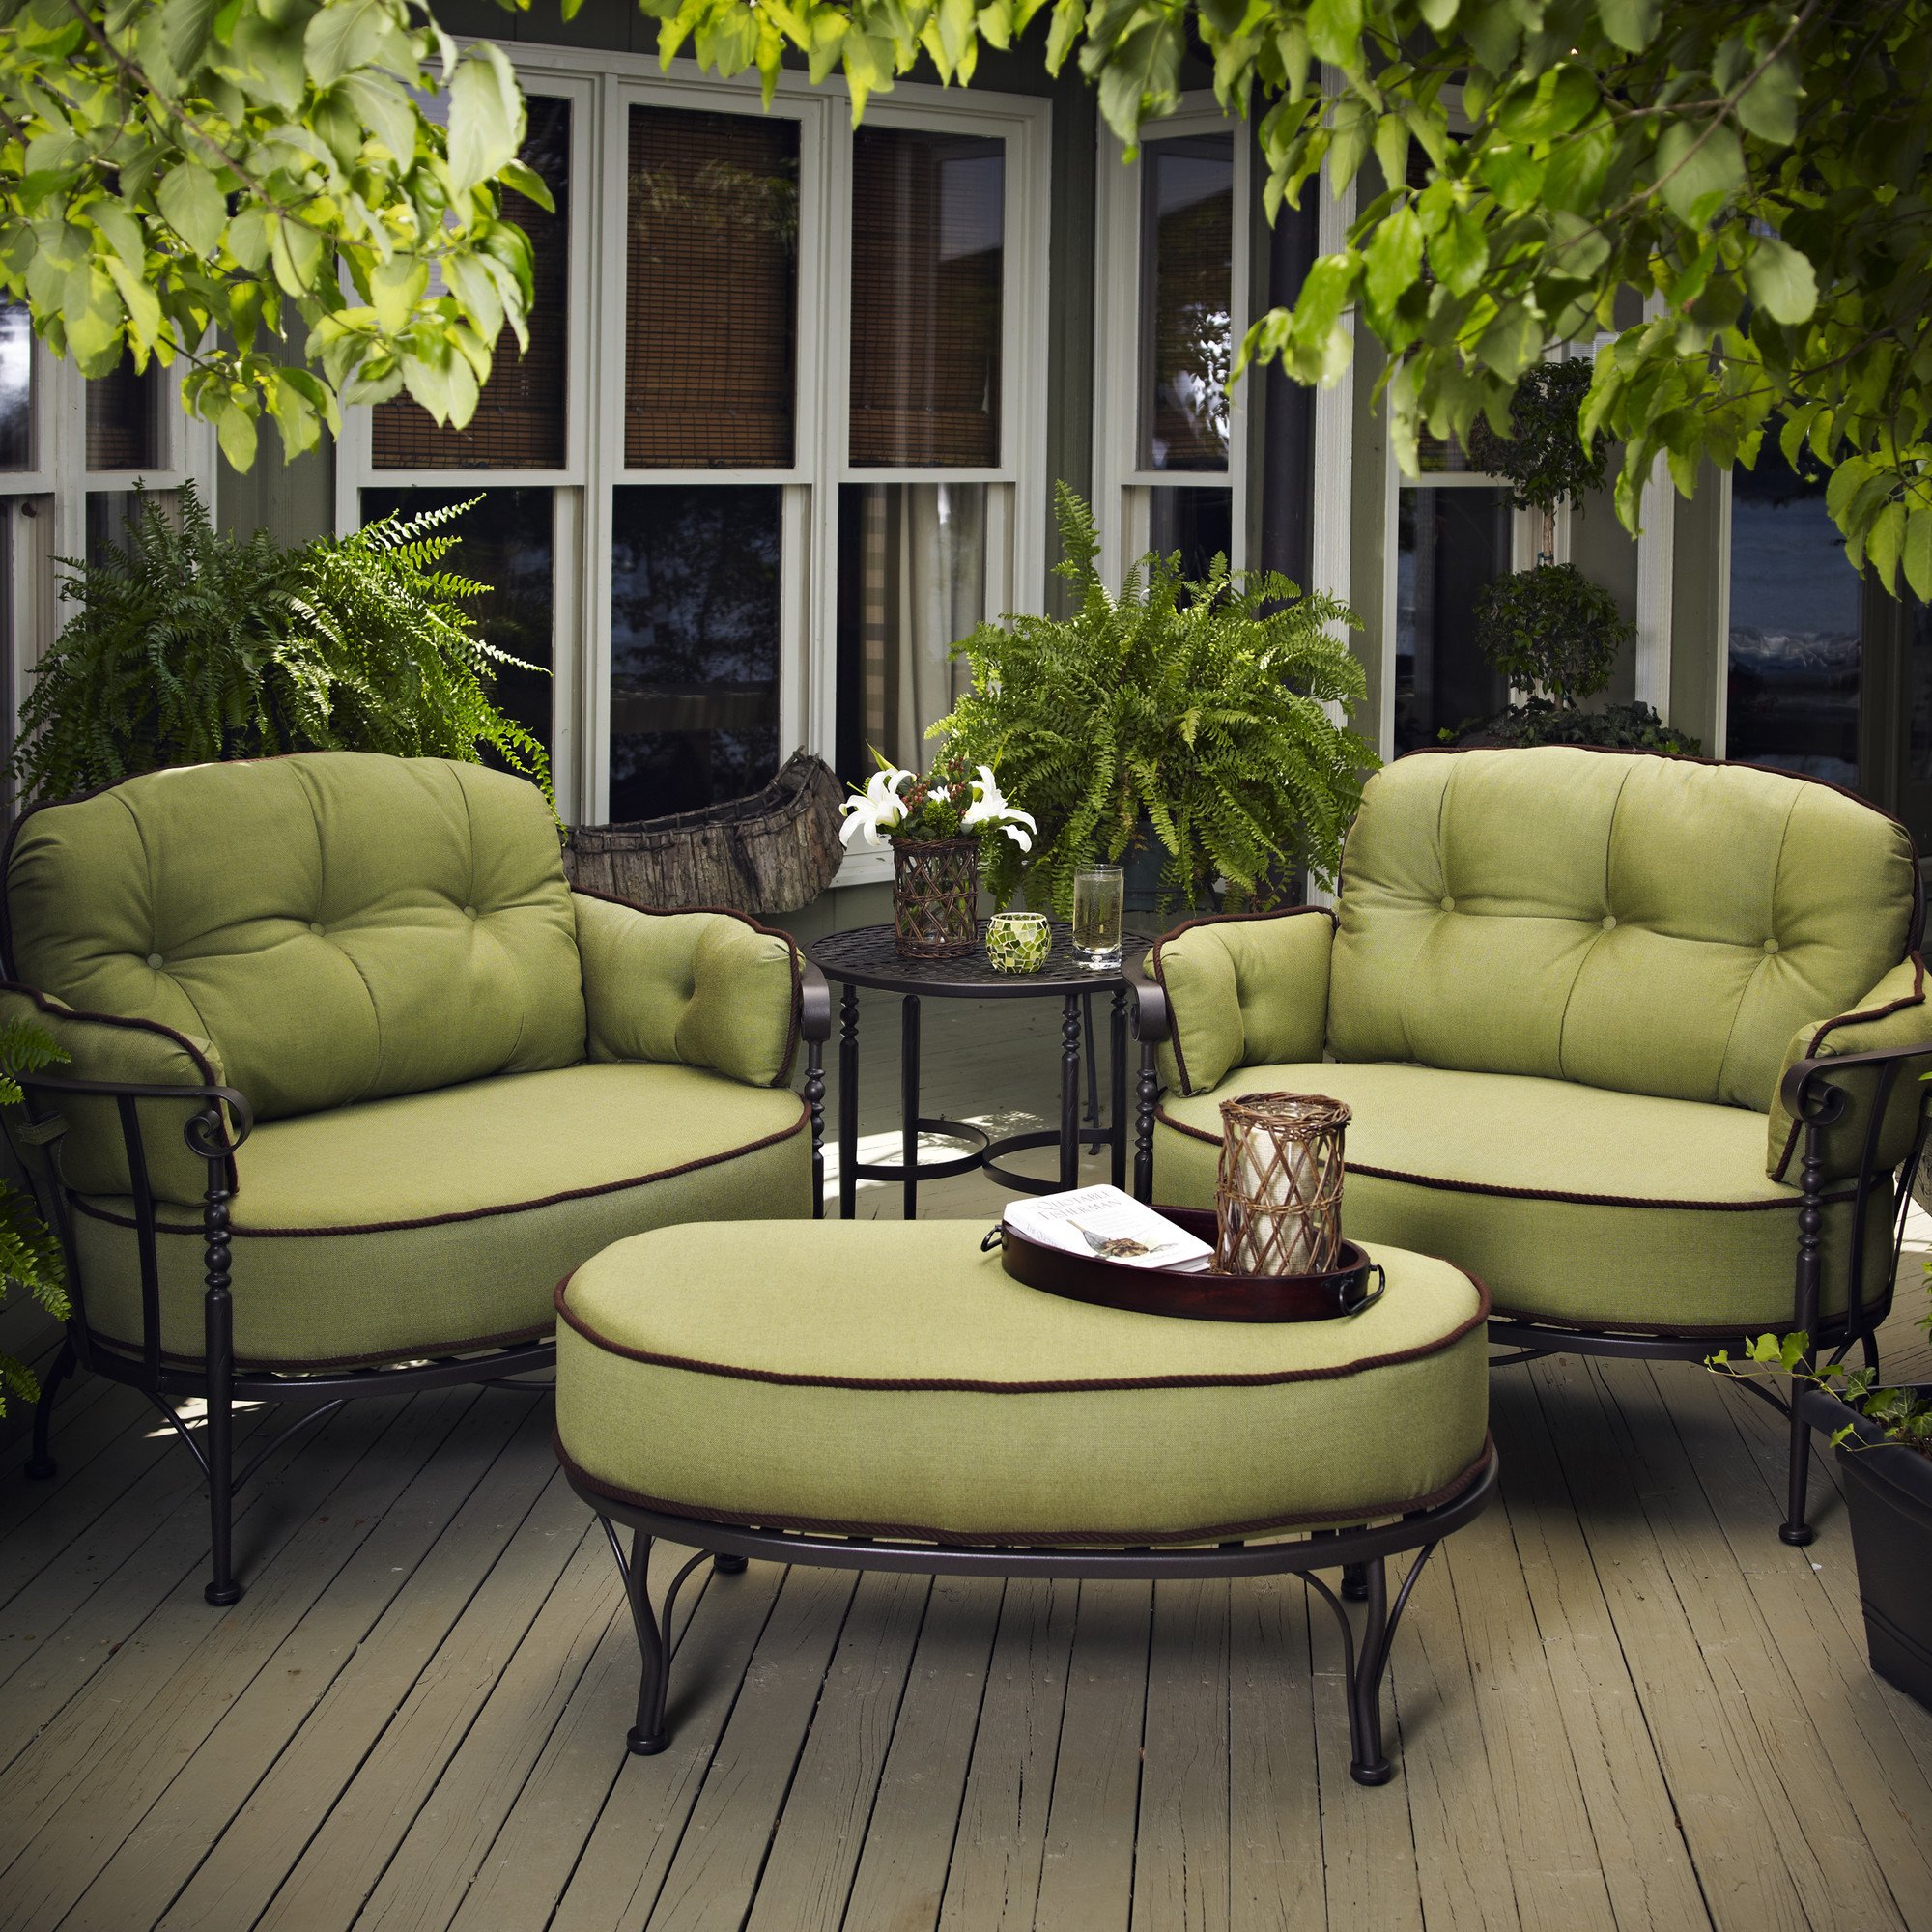 16 Relaxing Patio Conversation Set Designs for Spring